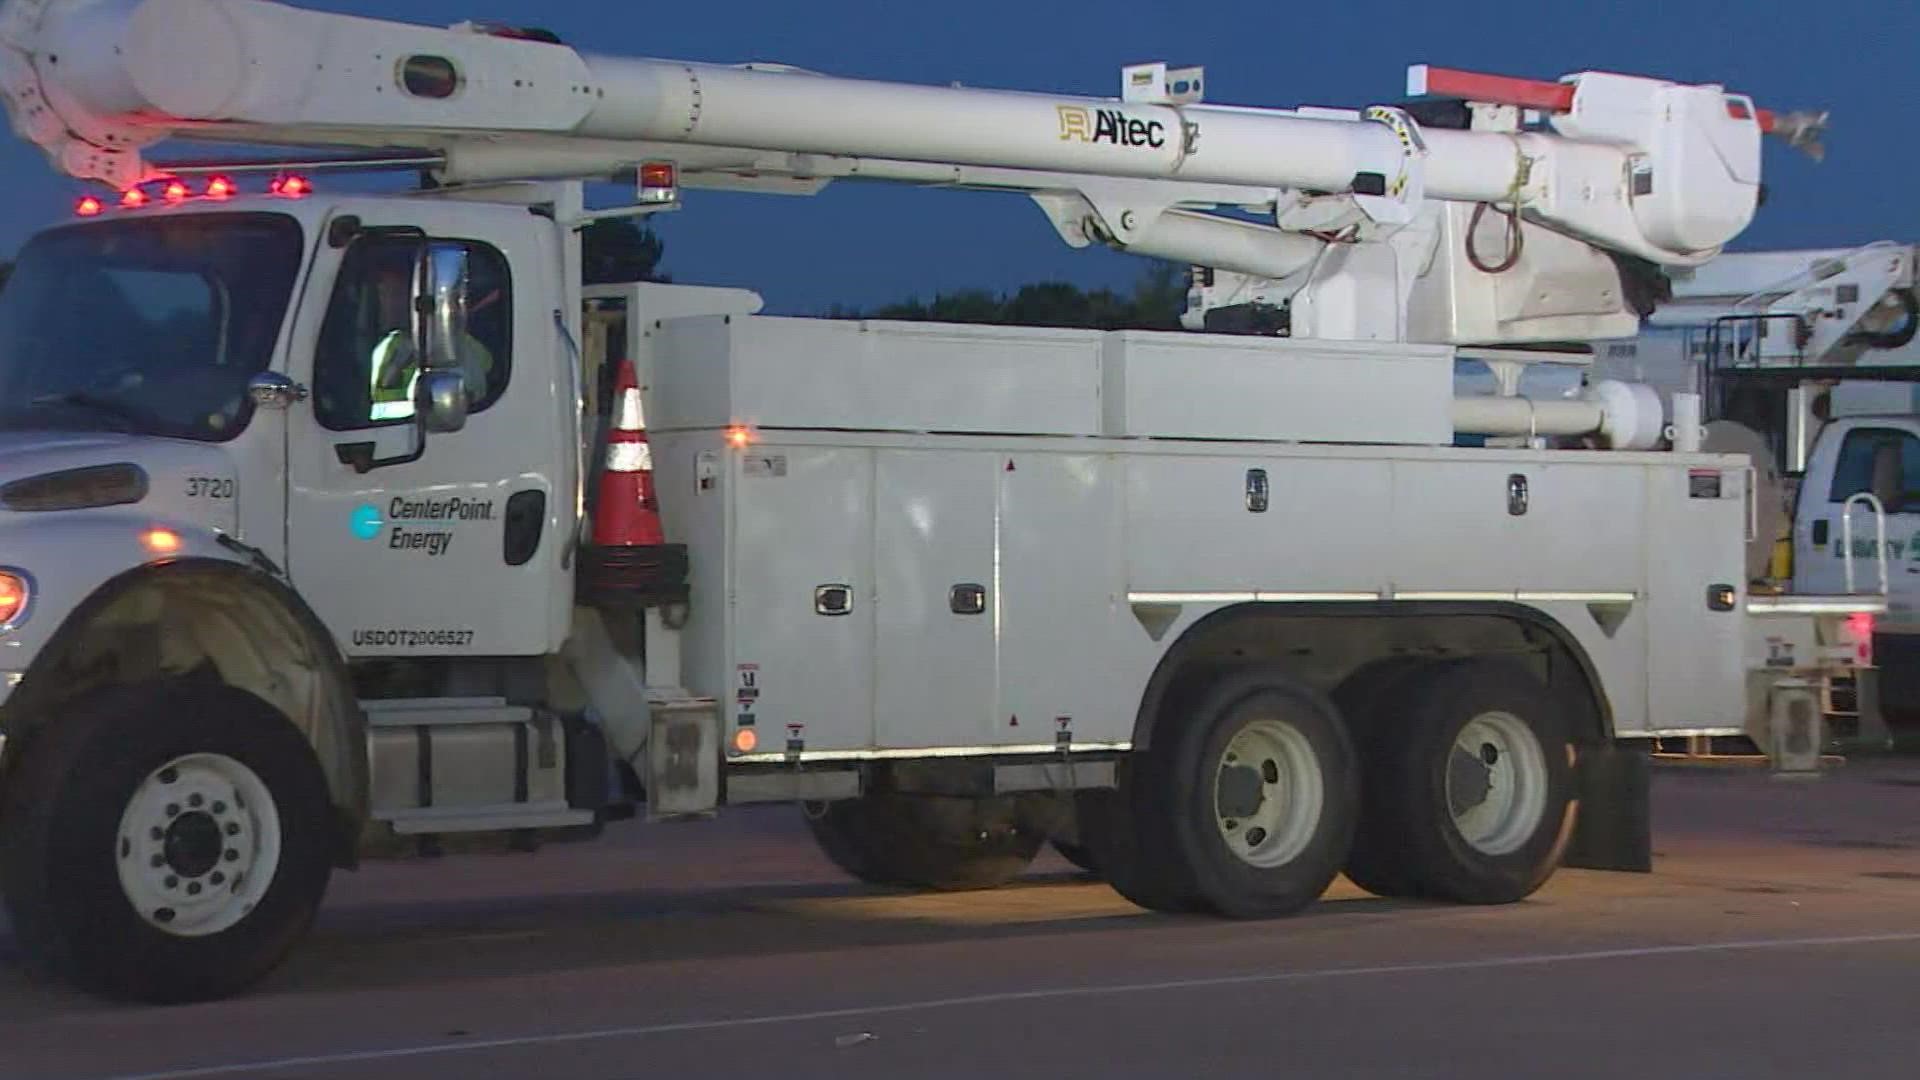 KHOU 11's Michelle Choi reports on crews heading to Louisiana to help and restore power after Ida's landfall